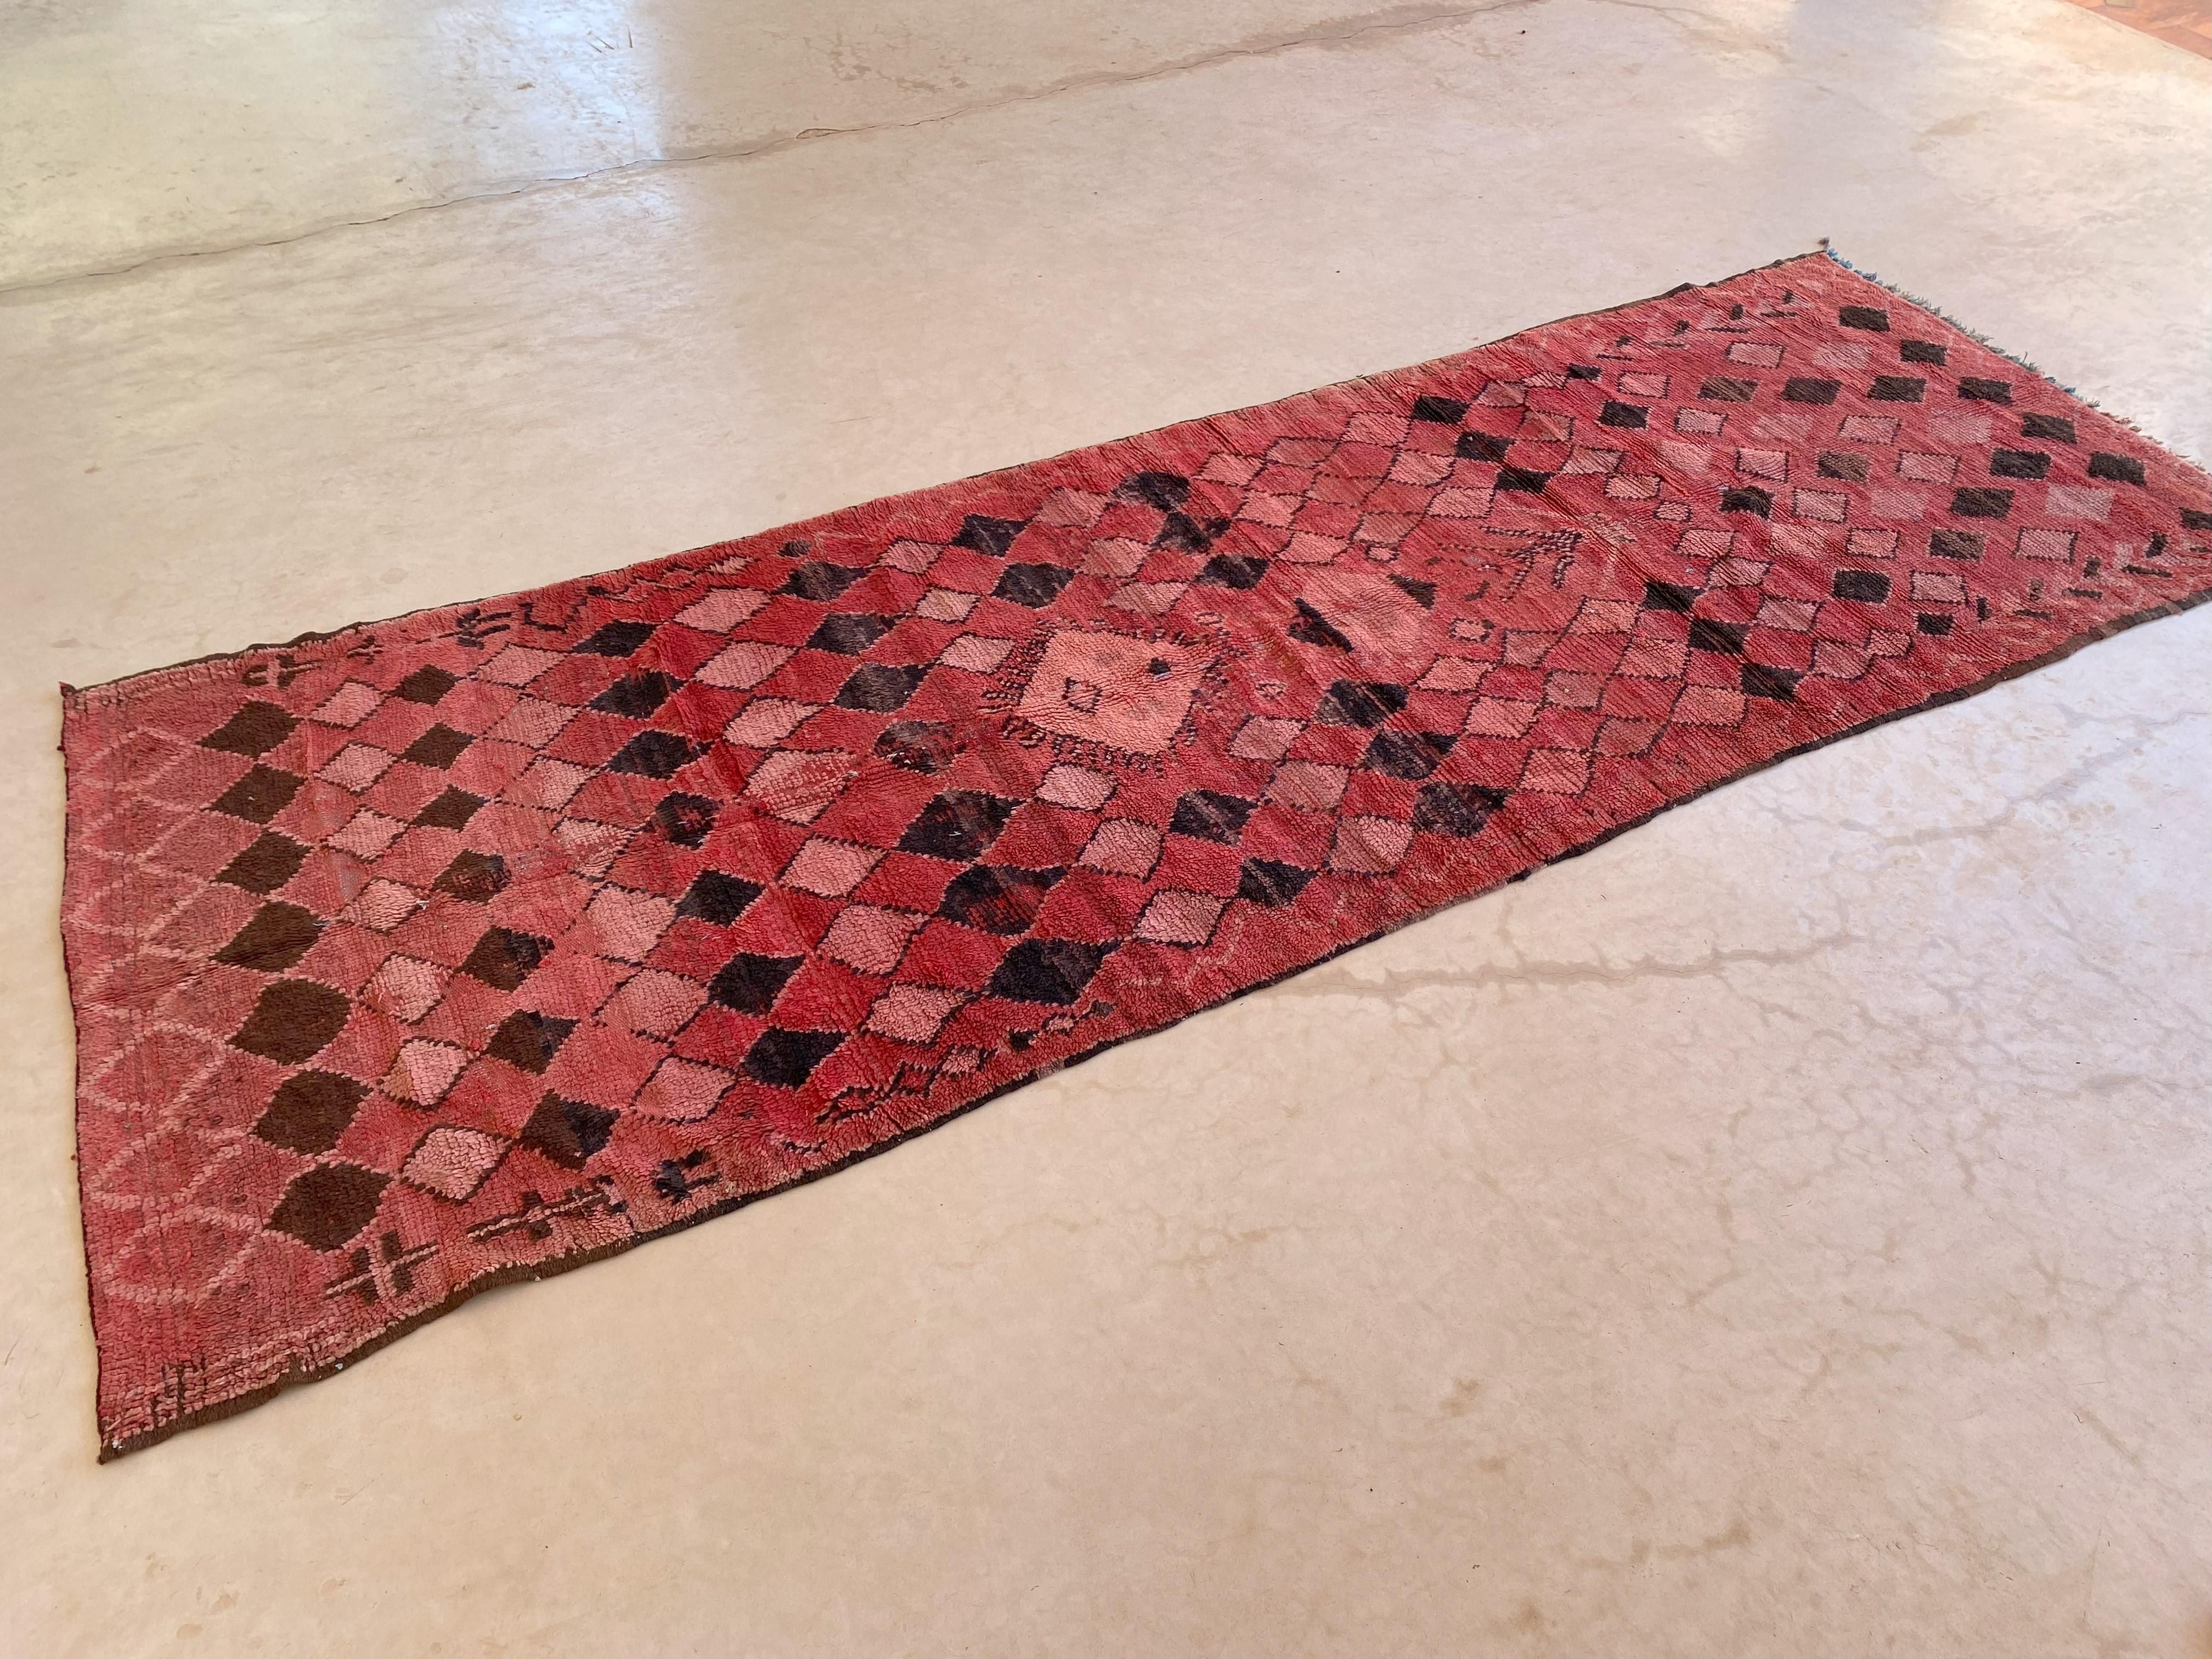 Hand-Woven Vintage Moroccan Boujad rug - Red/black/pink - 4.1x11.6feet / 126x354cm For Sale